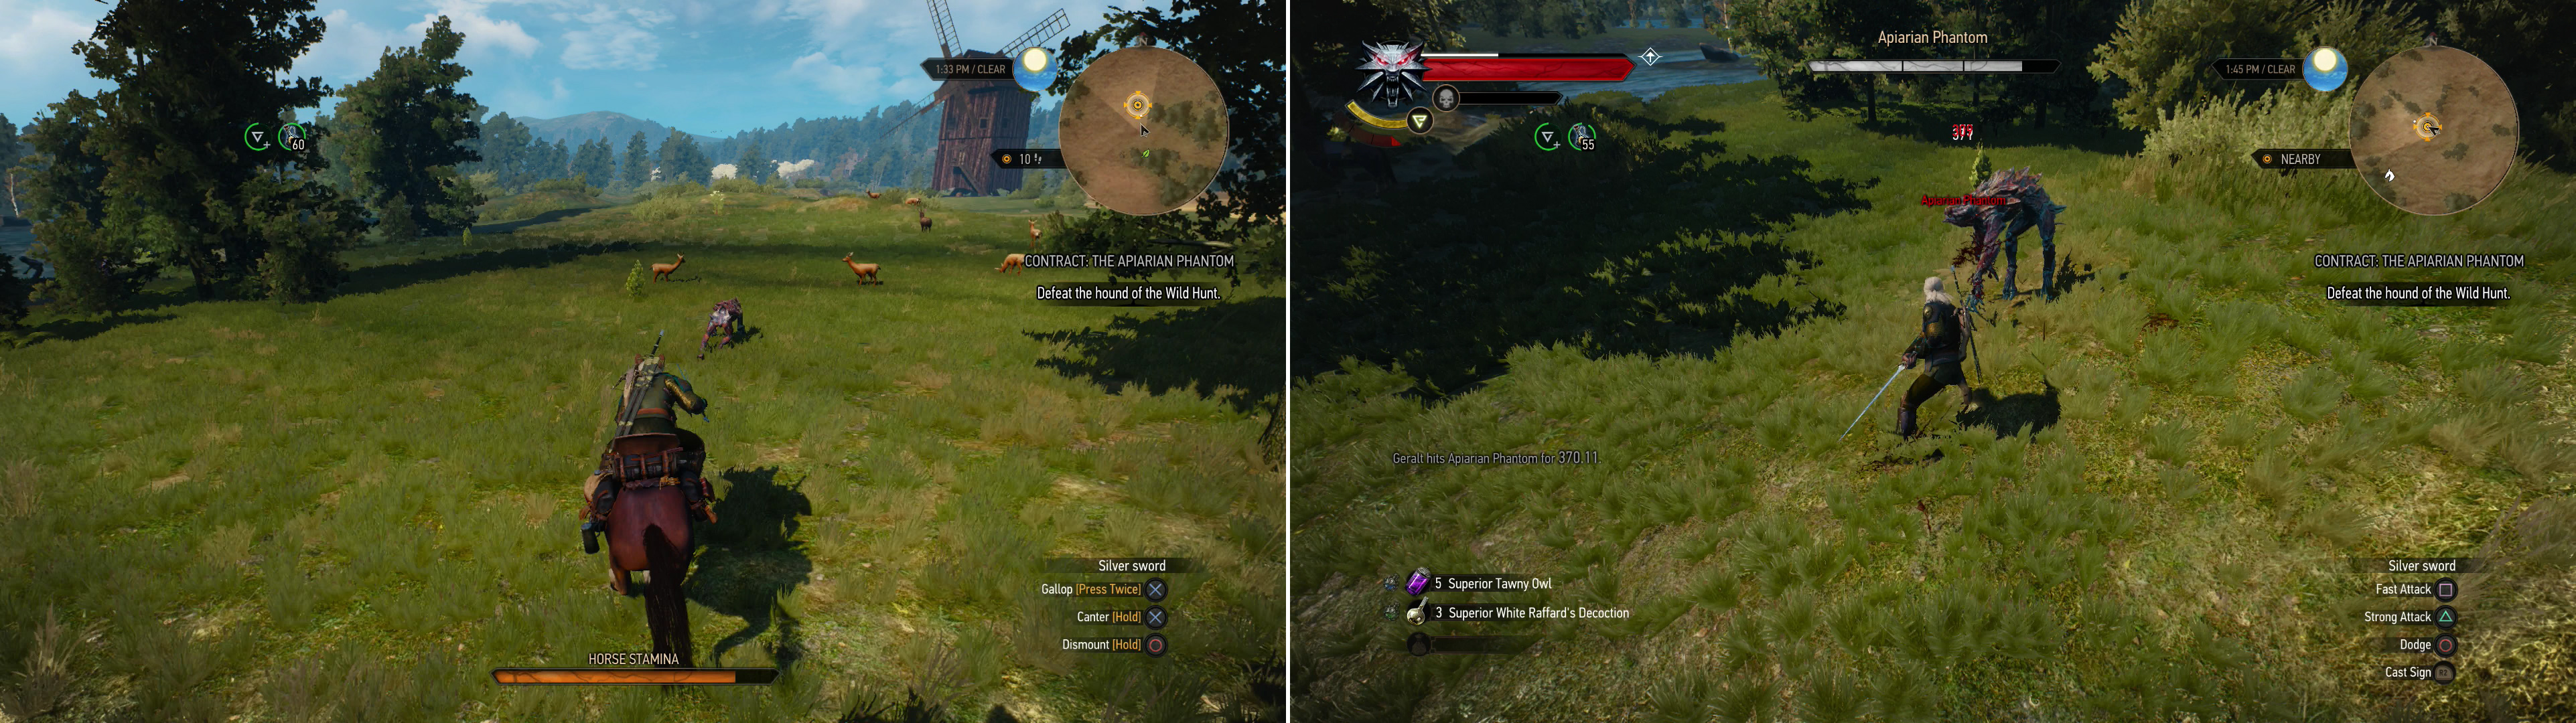 Chase down the “Apiarian Phantom” (left), then when it tires, dismount and slay it (right).